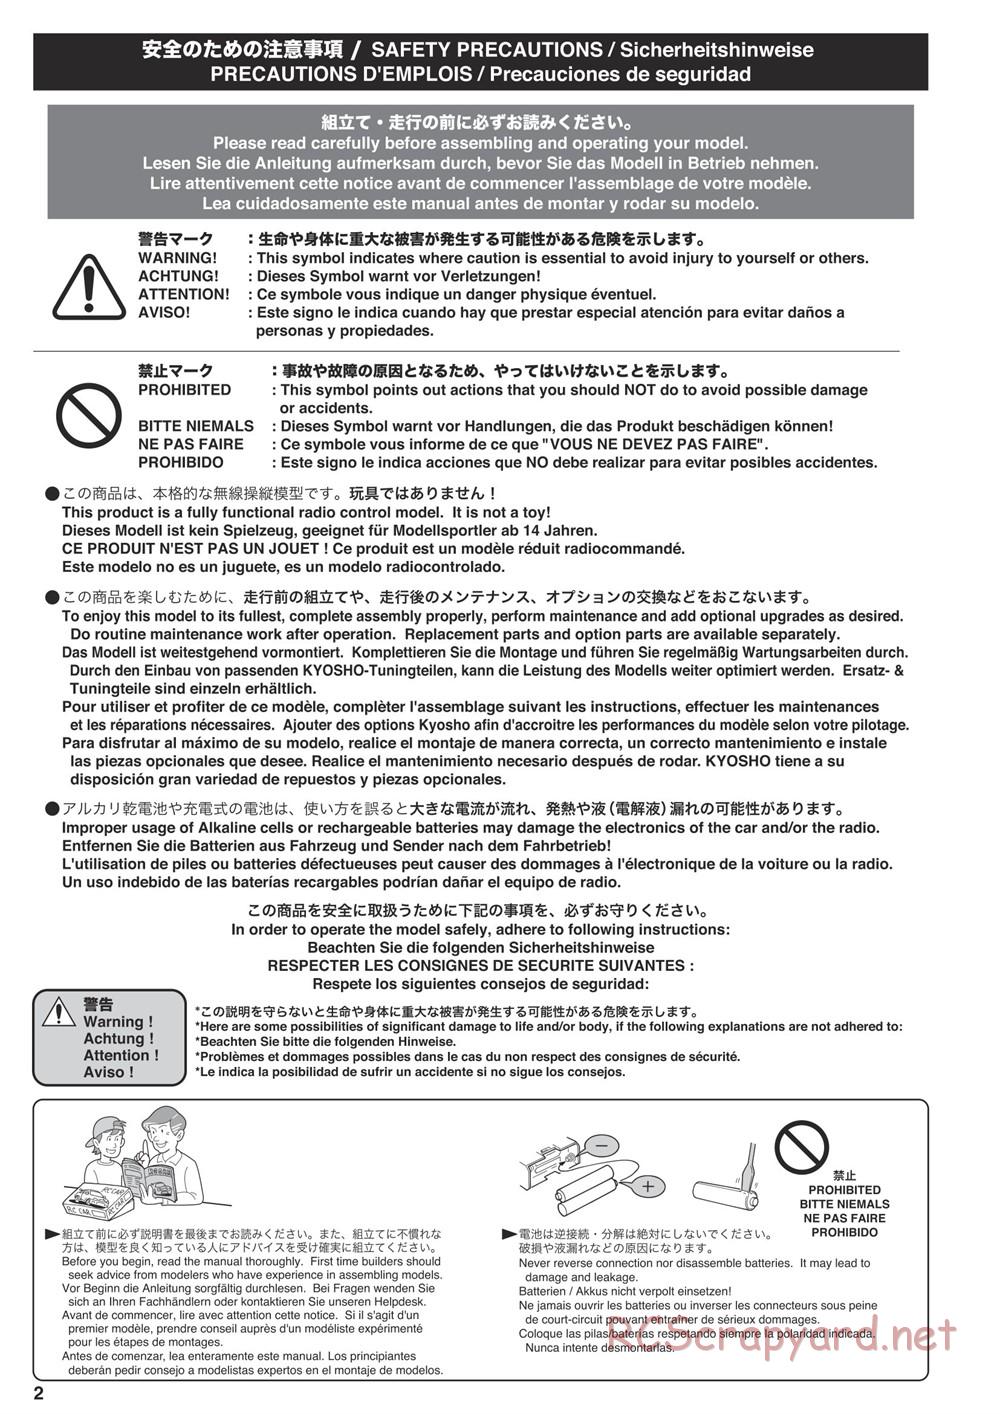 Kyosho - Outlaw Rampage Pro - Manual - Page 2